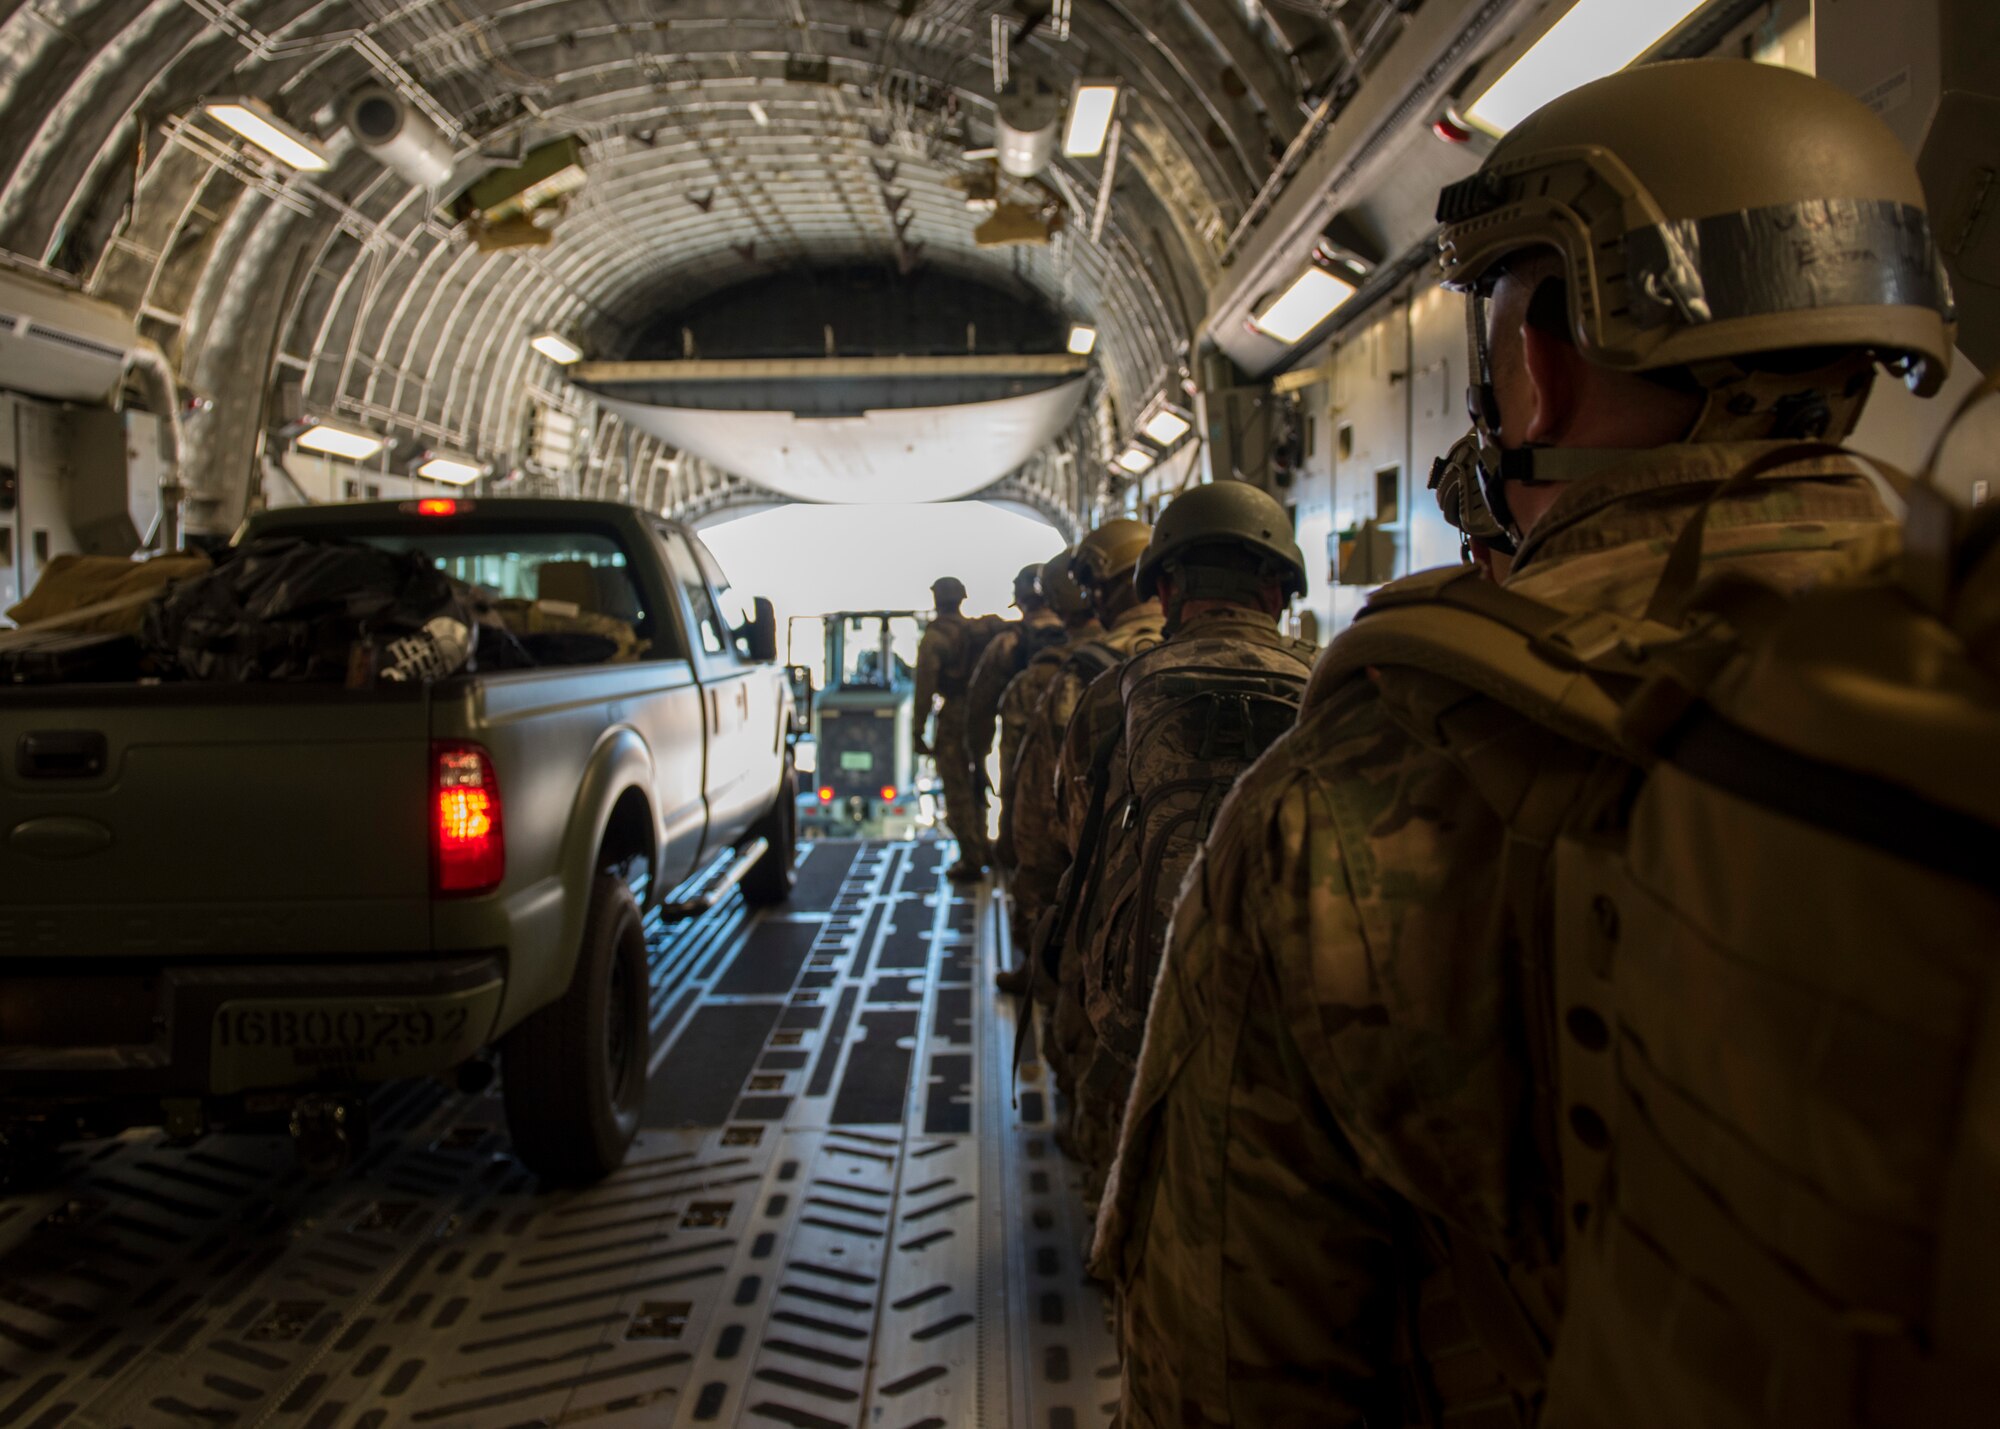 Airmen assigned to the 621st Contingency Response Support Squadron, Joint Base McGuire-Dix-Lakehurst, N.J., exit a C-17 Globemaster III cargo aircraft during Exercise JERSEY WRATH 19-1 in Mesa, Ariz., Nov. 13, 2018. The 621st CRSS participated in the mobility-centric training exercise which integrated both mobility and combat assets in a realistic training scenario. (U.S. Air Force photo by Airman 1st Class Jacob Wongwai)